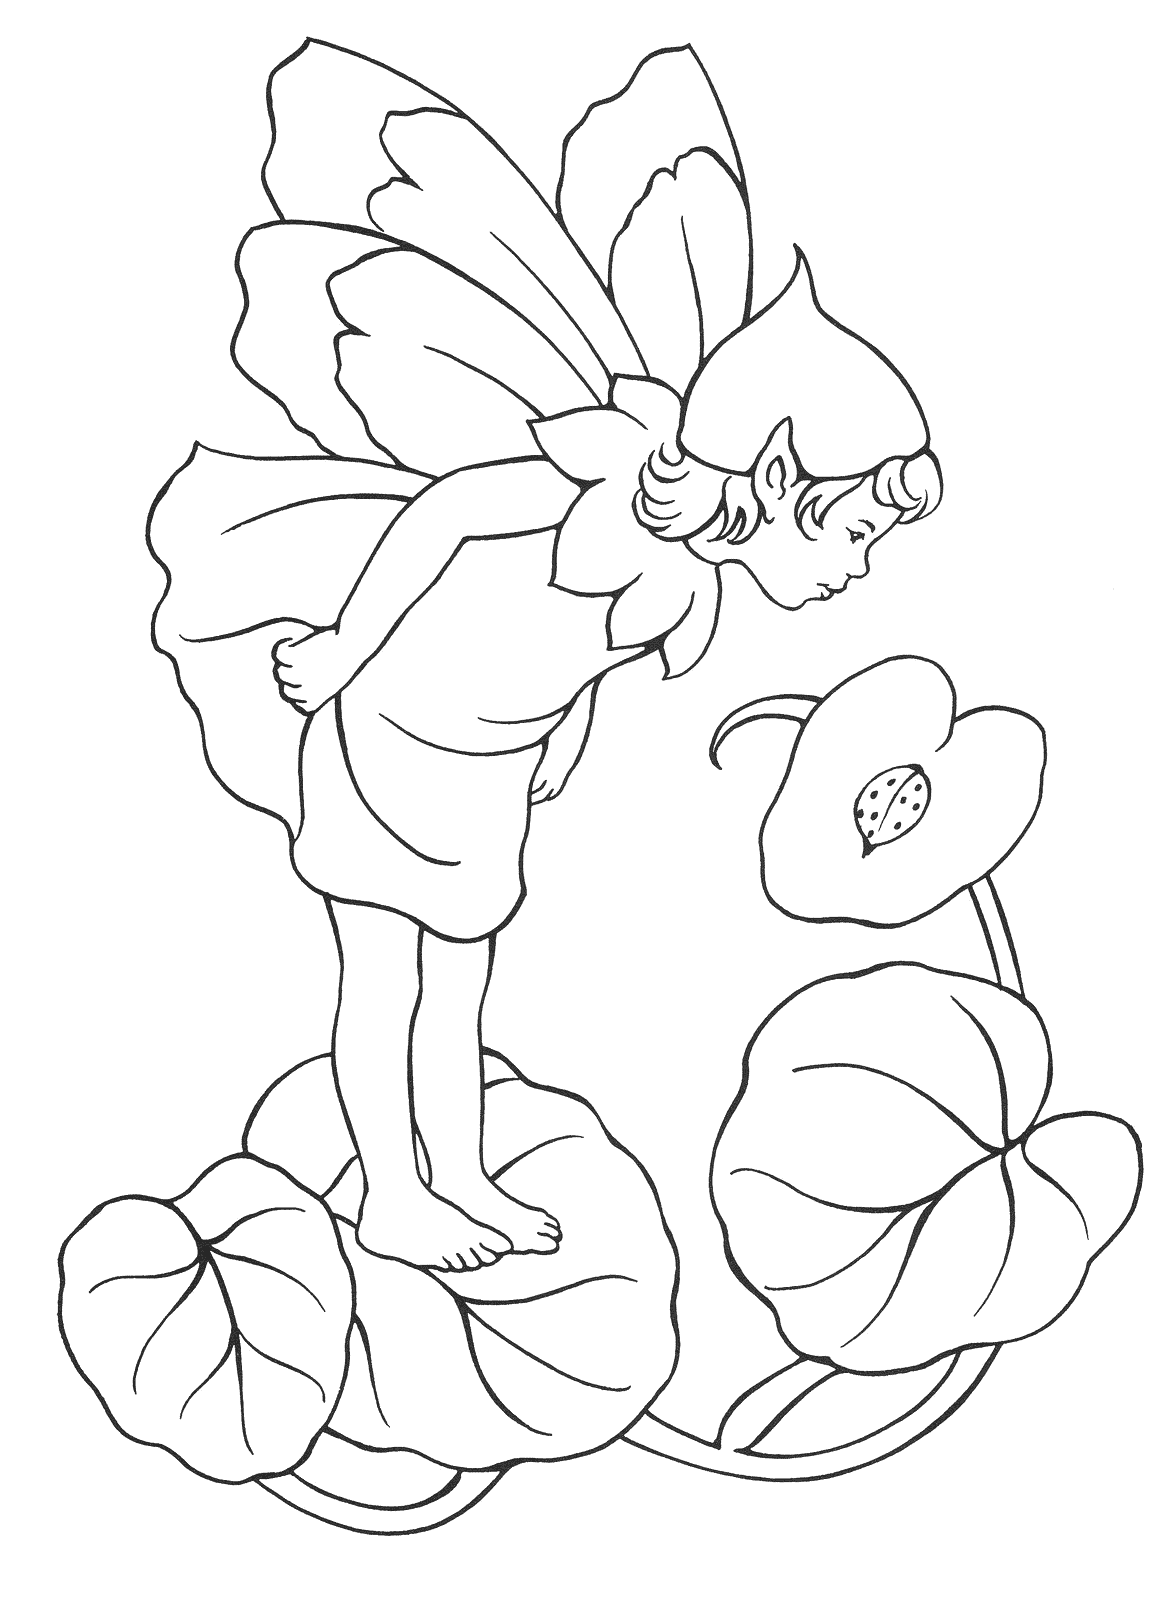 Coloring page - Little Elf